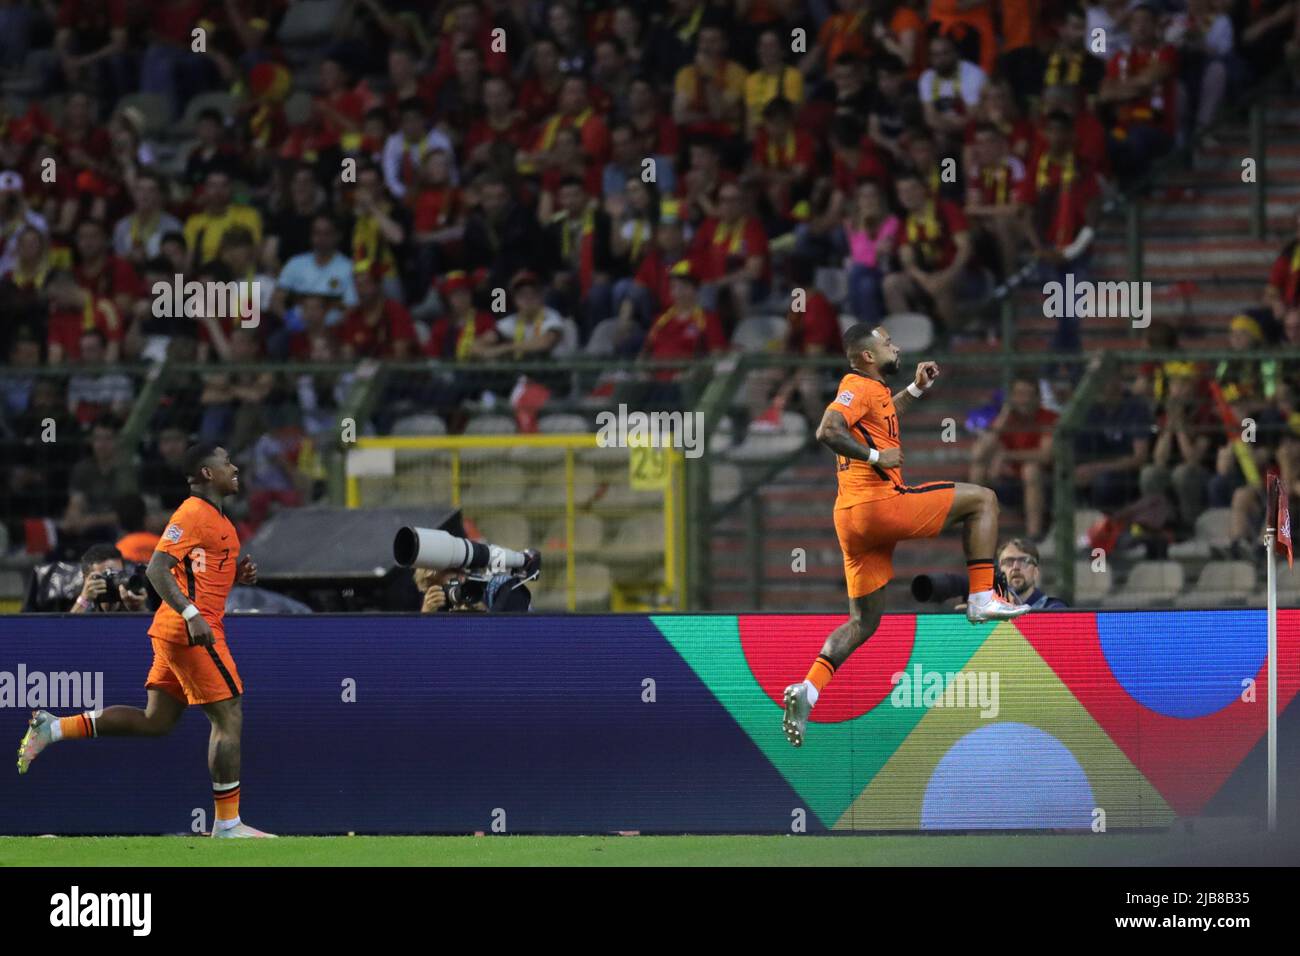 Brussels, Belgium. 3rd June, 2022. Memphis Depay (R) of the Netherlands celebrates scoring during the football match of Group 4 in League A of the UEFA Nations League between Belgium and the Netherlands in Brussels, Belgium, June 3, 2022. Credit: Zheng Huansong/Xinhua/Alamy Live News Stock Photo